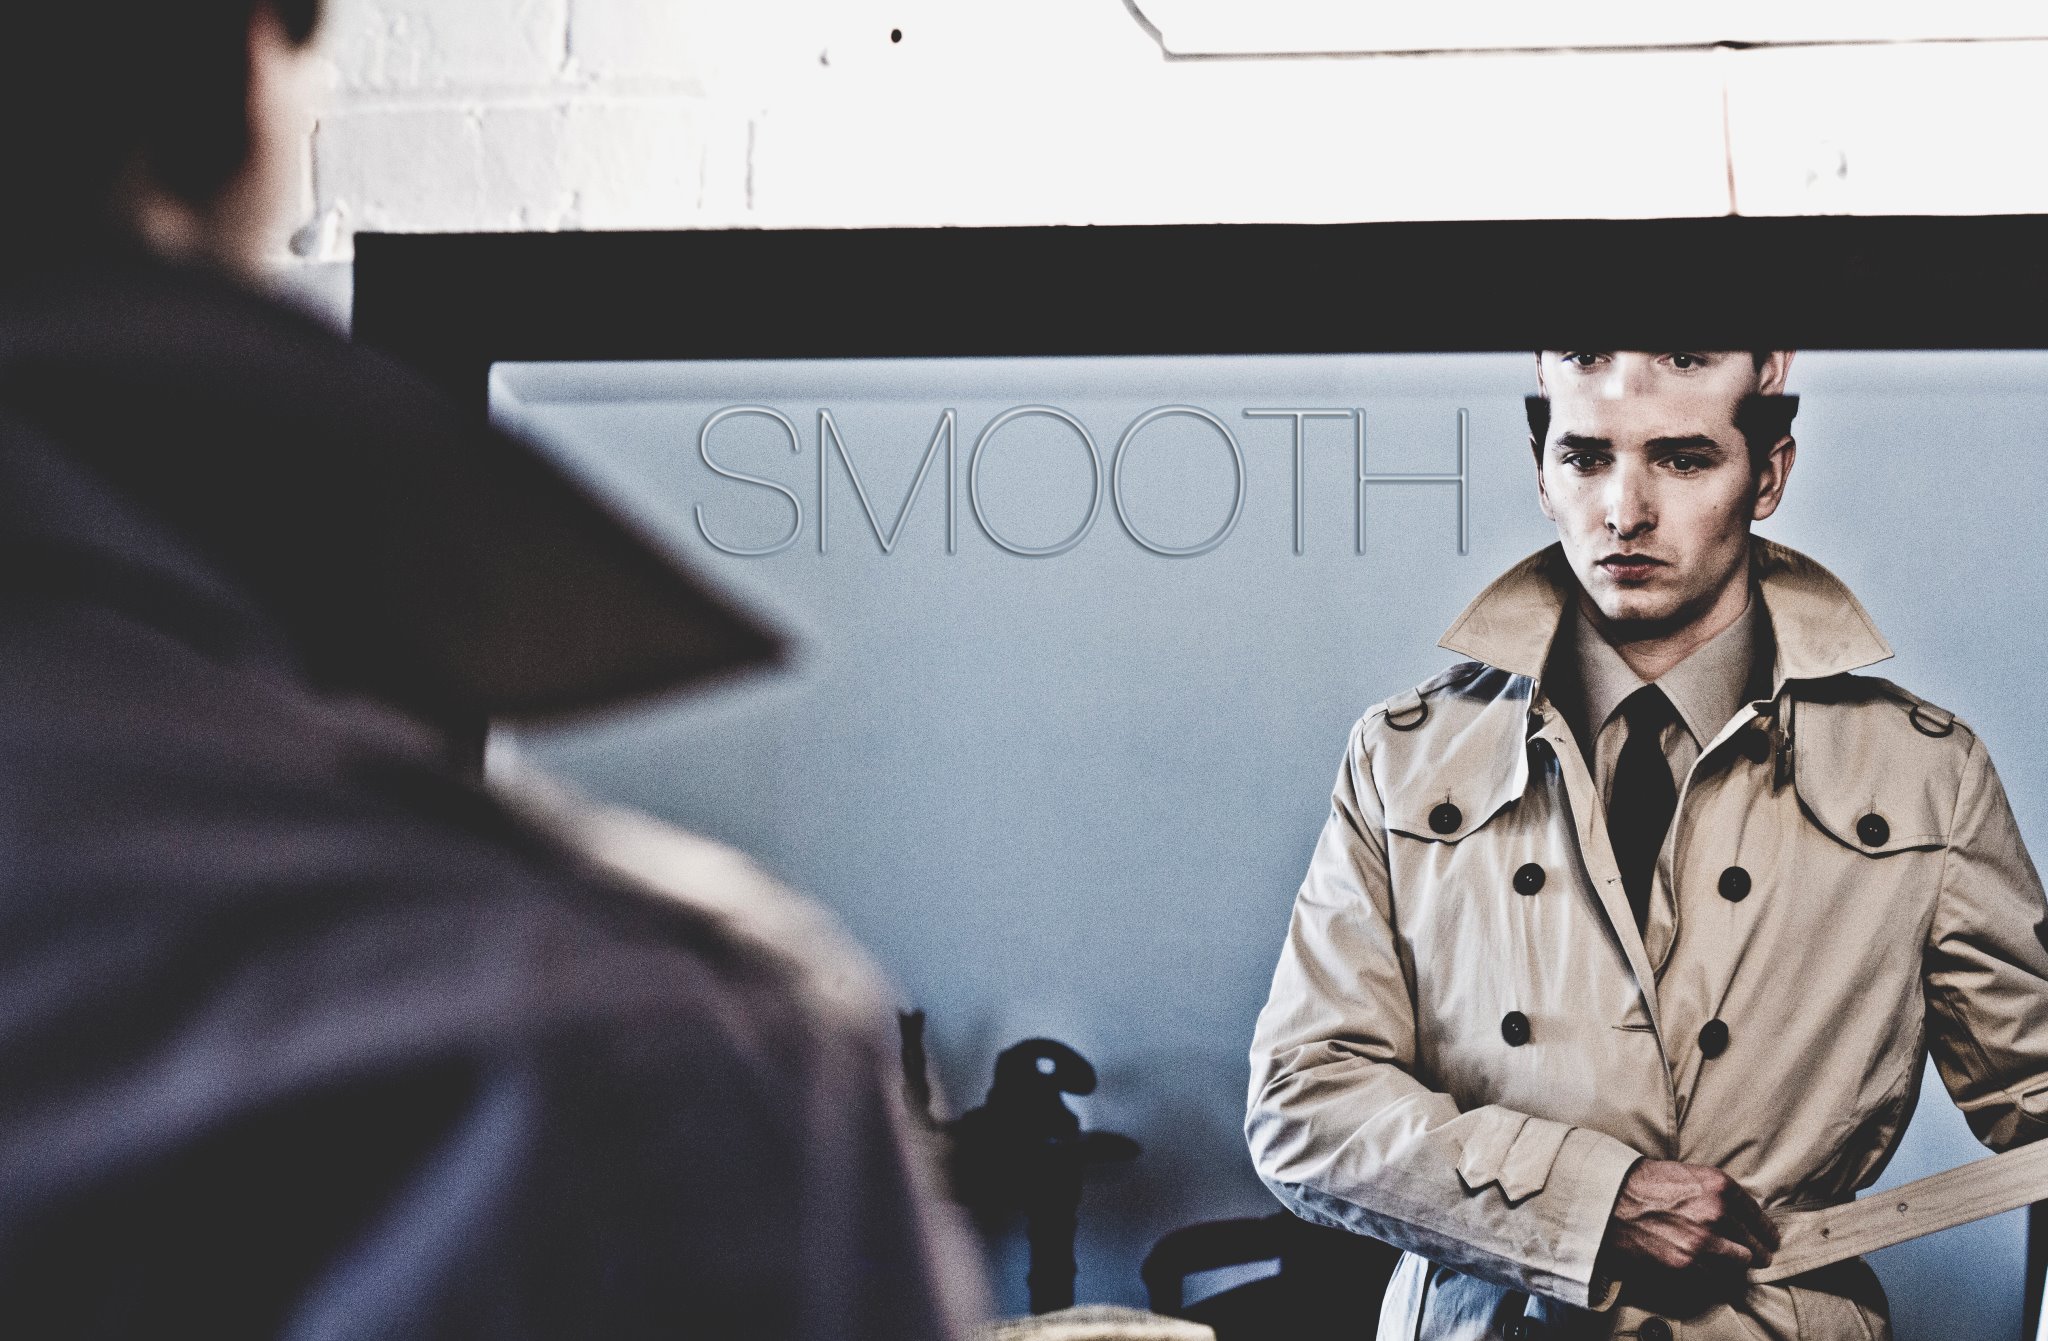 SMOOTH by Evert Houston Dir. Andy McQueen